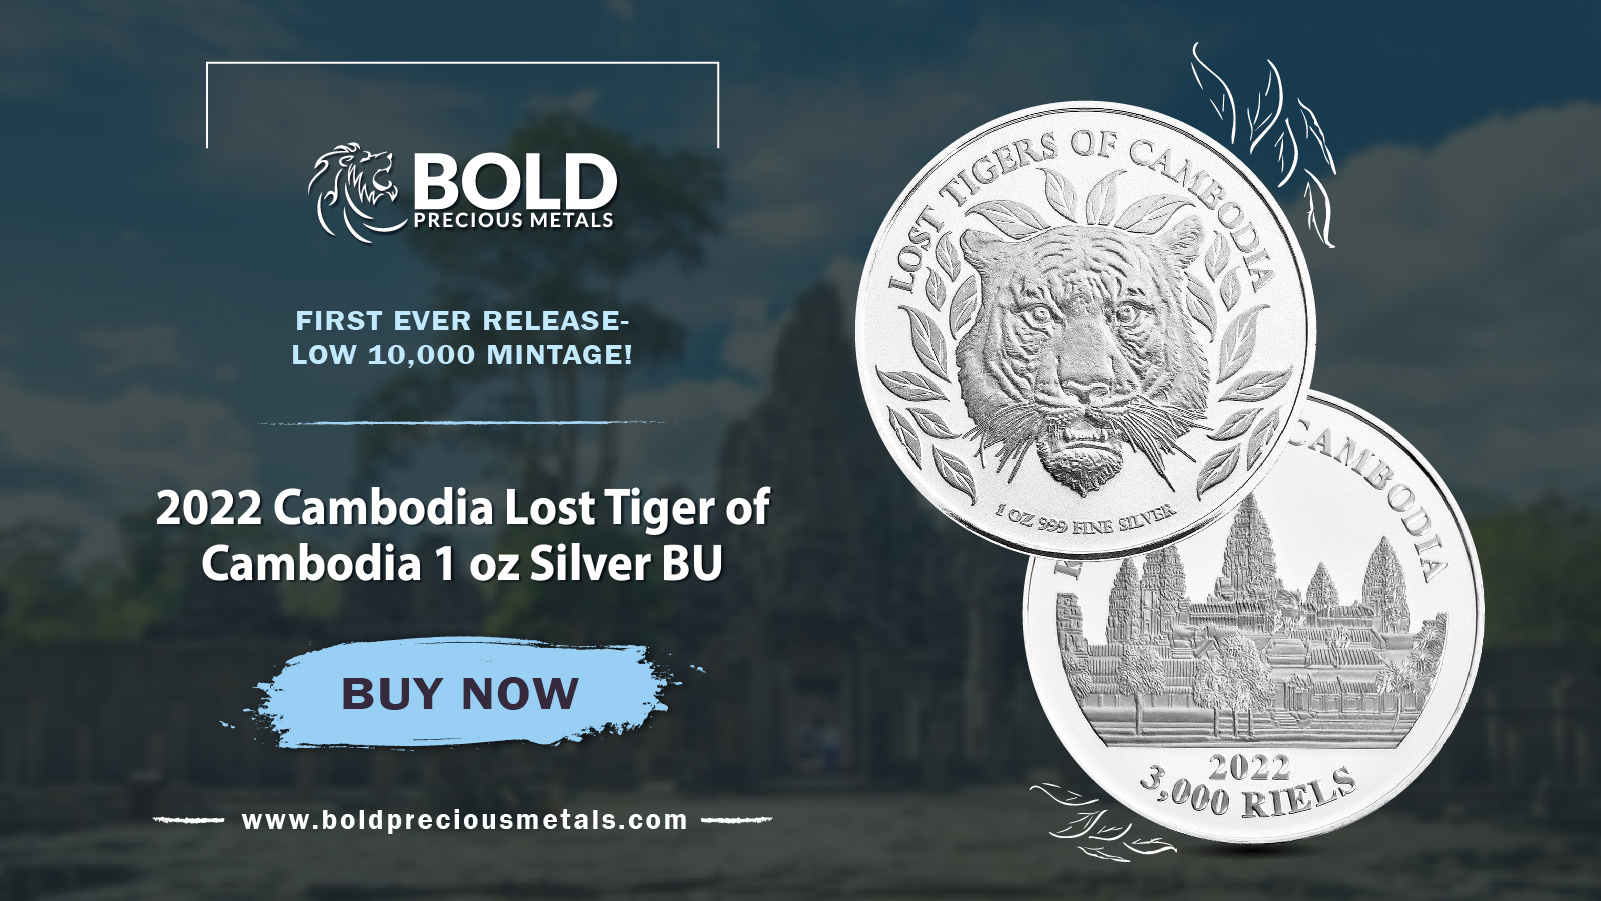 Bold Precious Metals on Twitter: &quot;2022 Cambodia Lost Tiger of Cambodia 1 oz  Silver BU. Don't Wait, BUY NOW! https://t.co/Lvc5Y93s6o #BOLDPreciousMetals  #bullion #stacking #silvercurrency #silvercoin #coincollection #investment # Silver #PreciousMetals ...